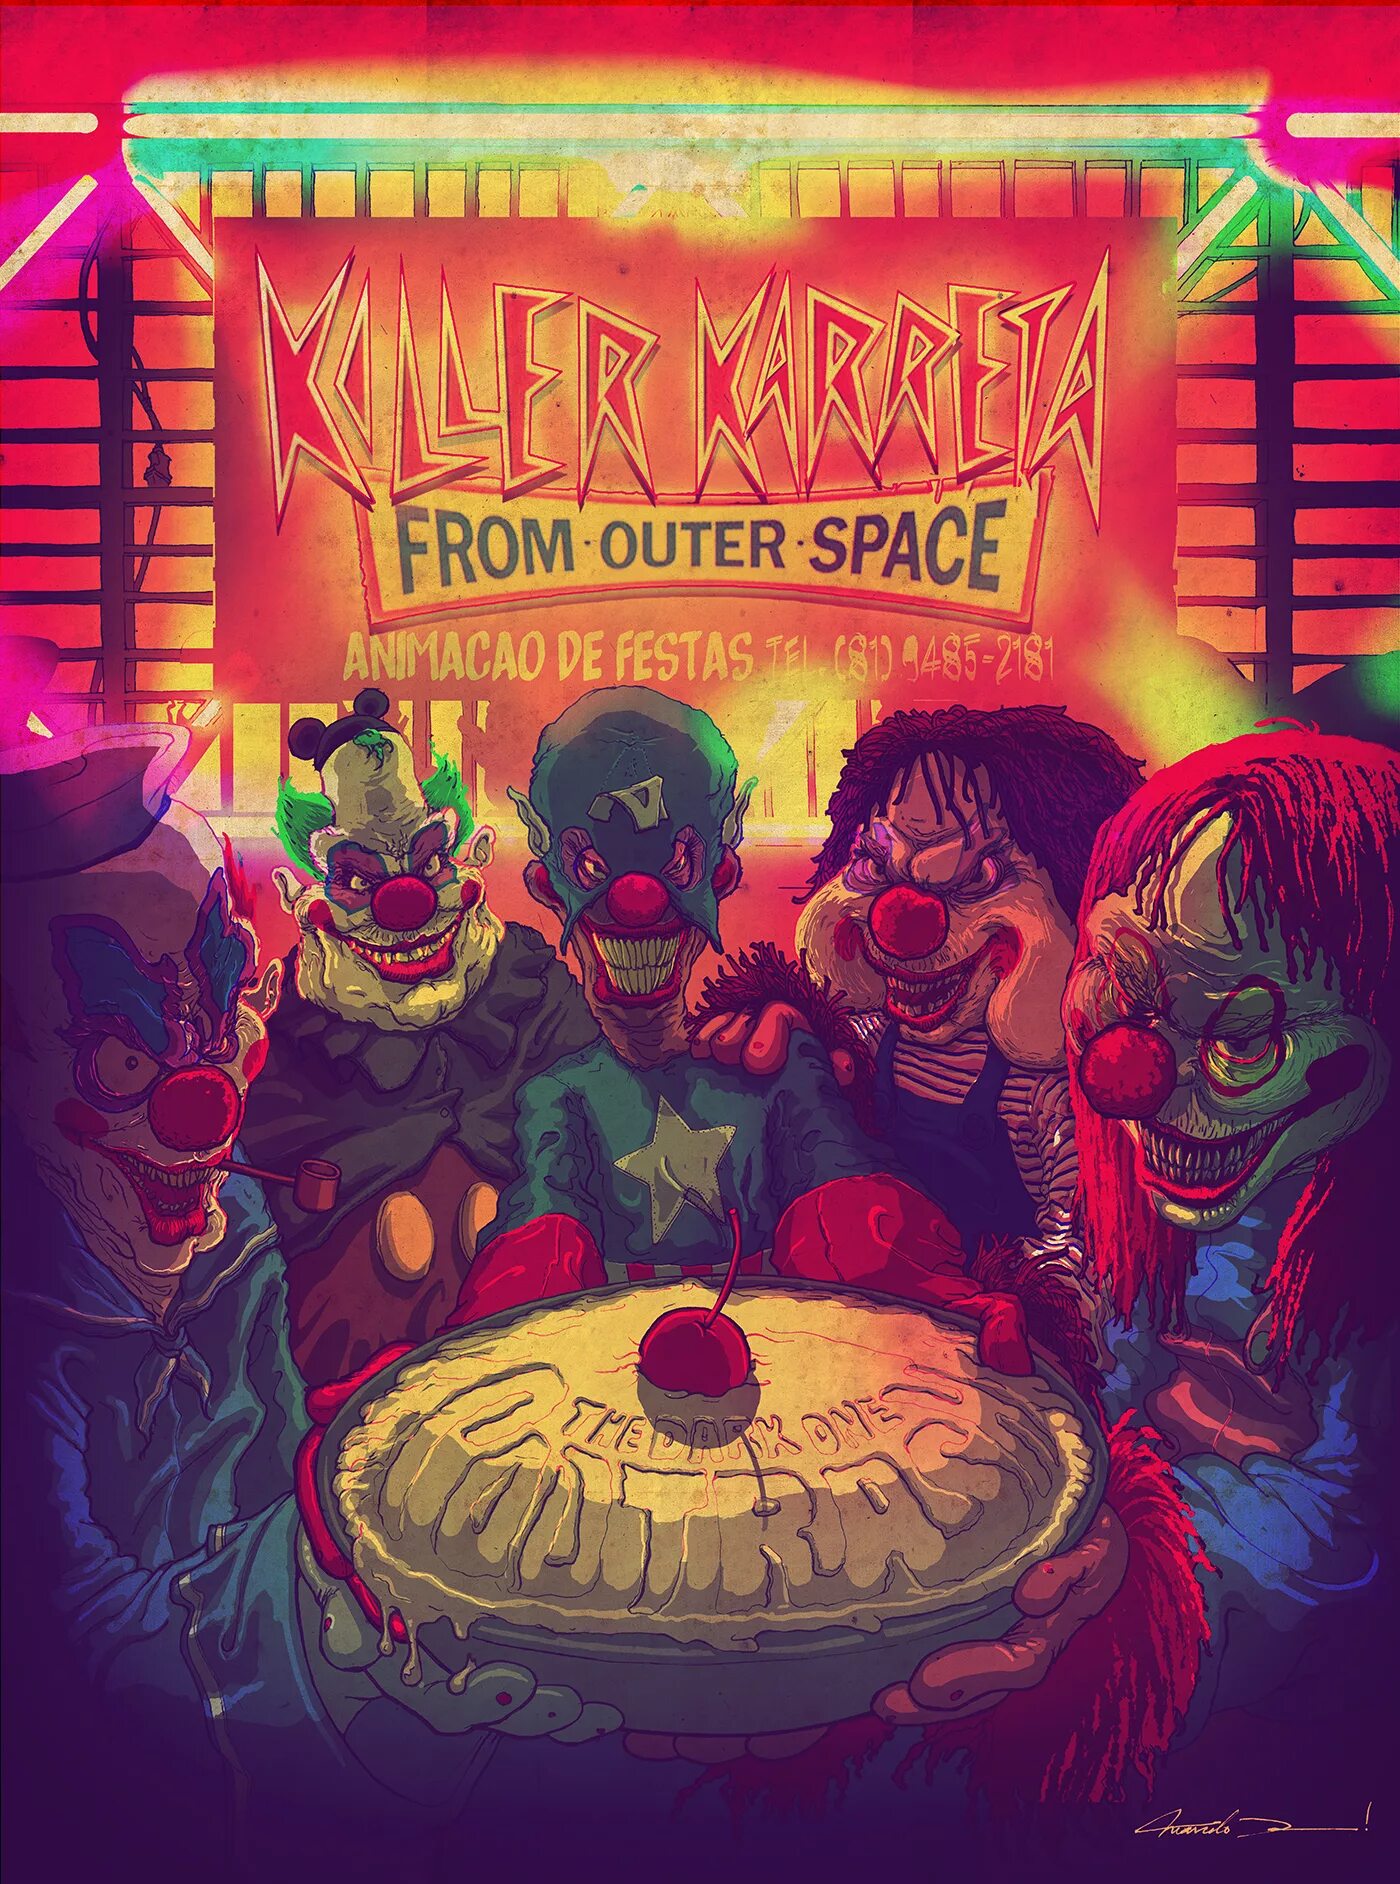 Killer from outer space. Killer Klowns from Outer Space 1988. Клоуны убийцы из космоса Постер. Killer Klowns from Outer Space. Killer Klowns from Outer Space the game.